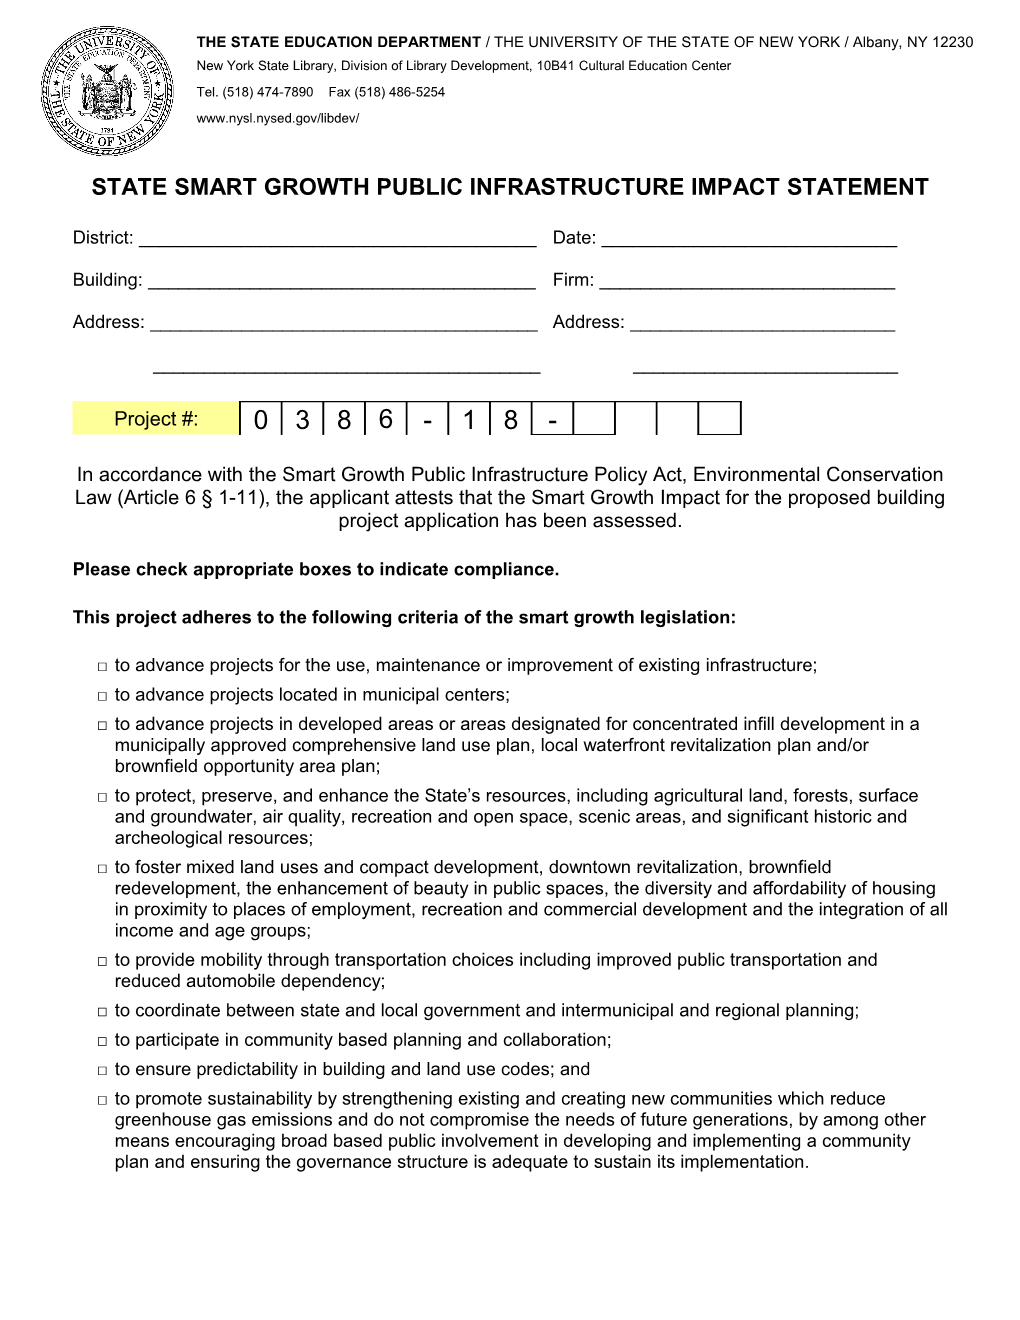 State Smart Growth Public Infrastructure Impact Statement Form